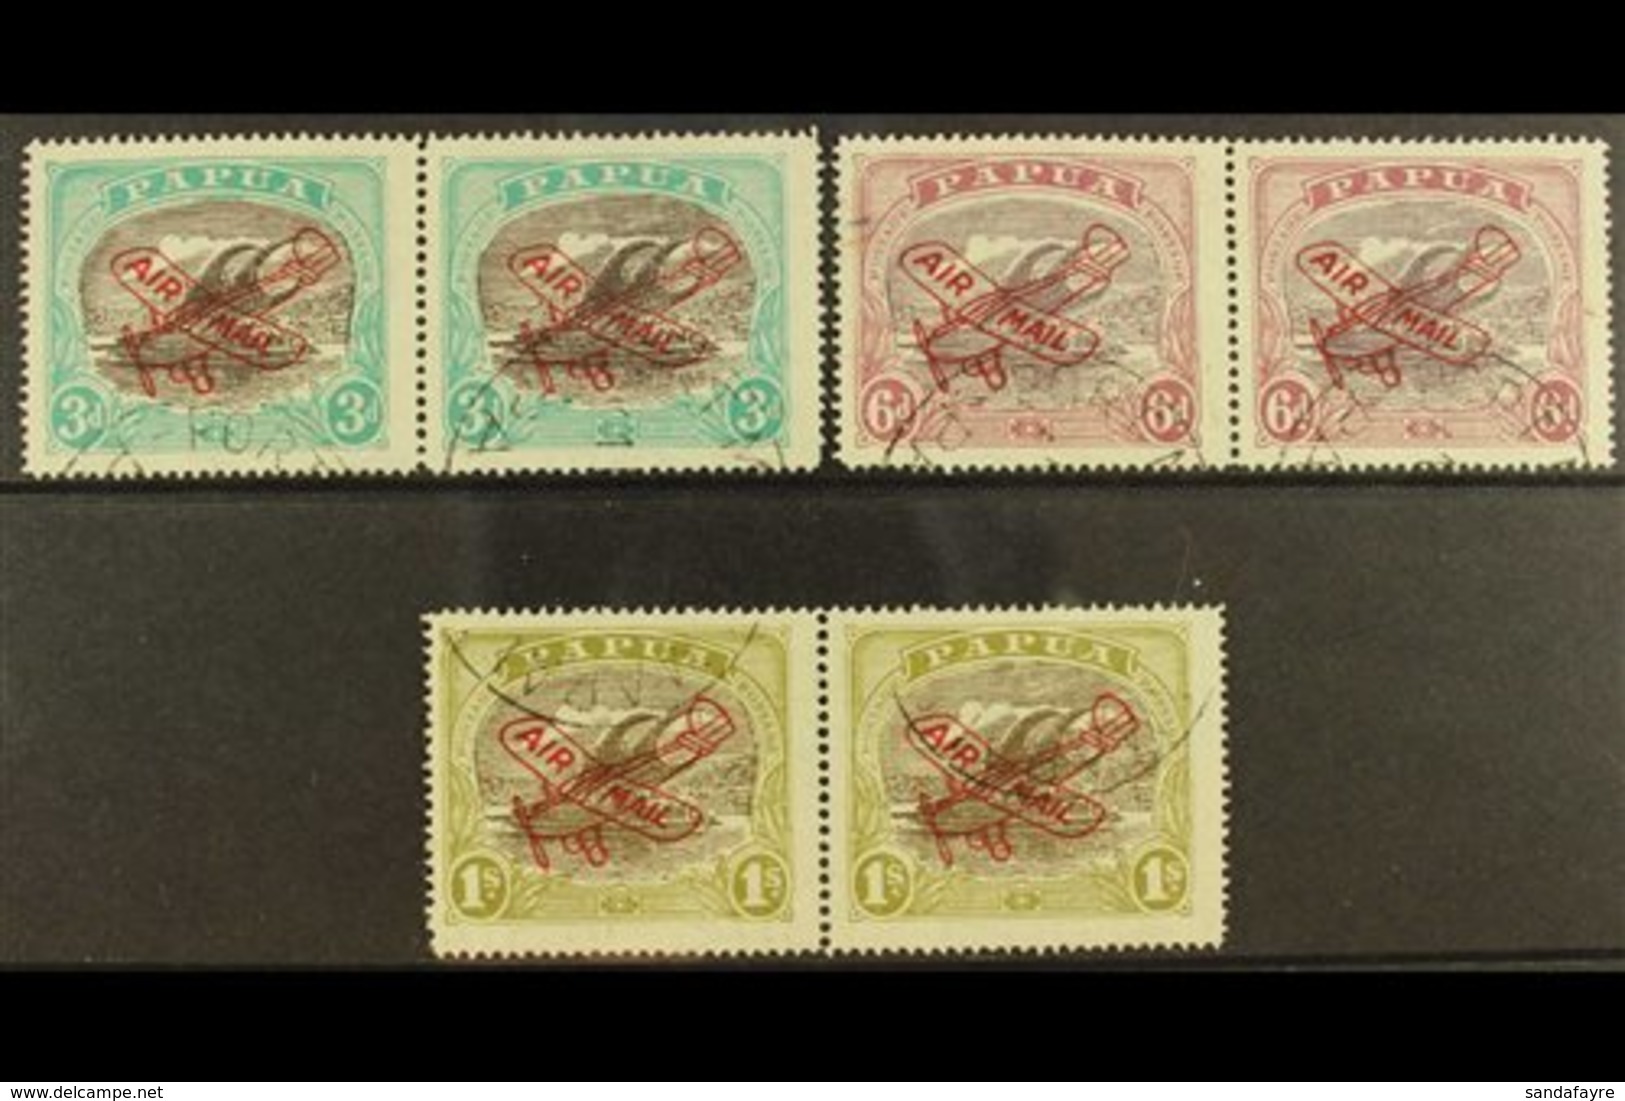 1930 Air Set, Ash Printing, SG 118-120, Each In A Horizontal Pair With One In Each Showing RIFT IN CLOUD, Fine Cds Used. - Papua New Guinea